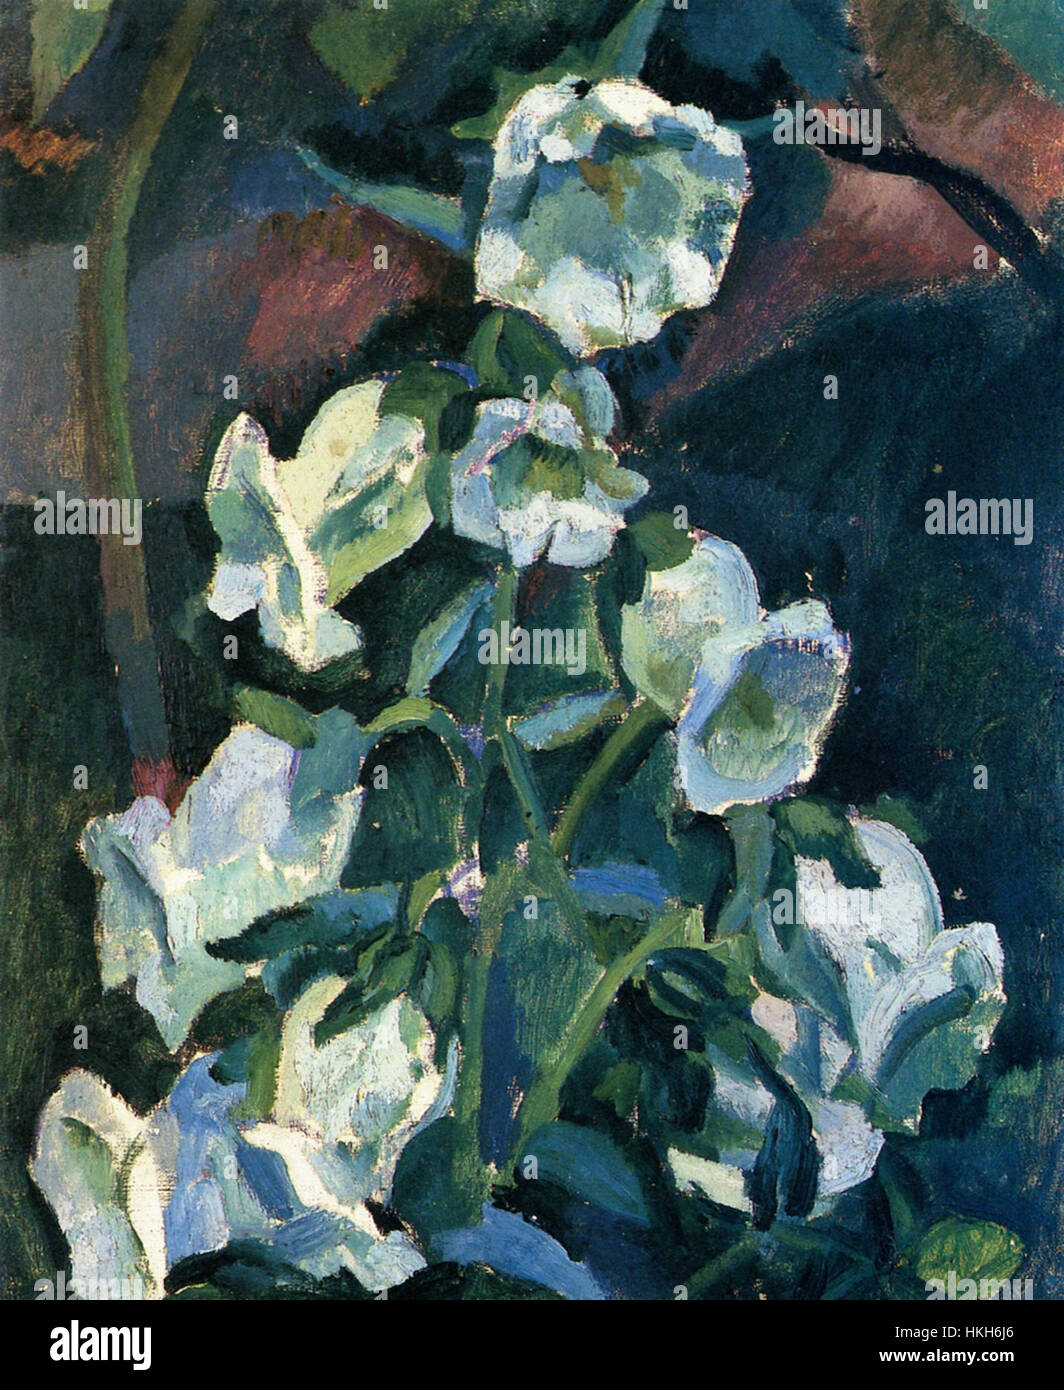 Robert Delaunay   Flowers   1909   Private collection Stock Photo